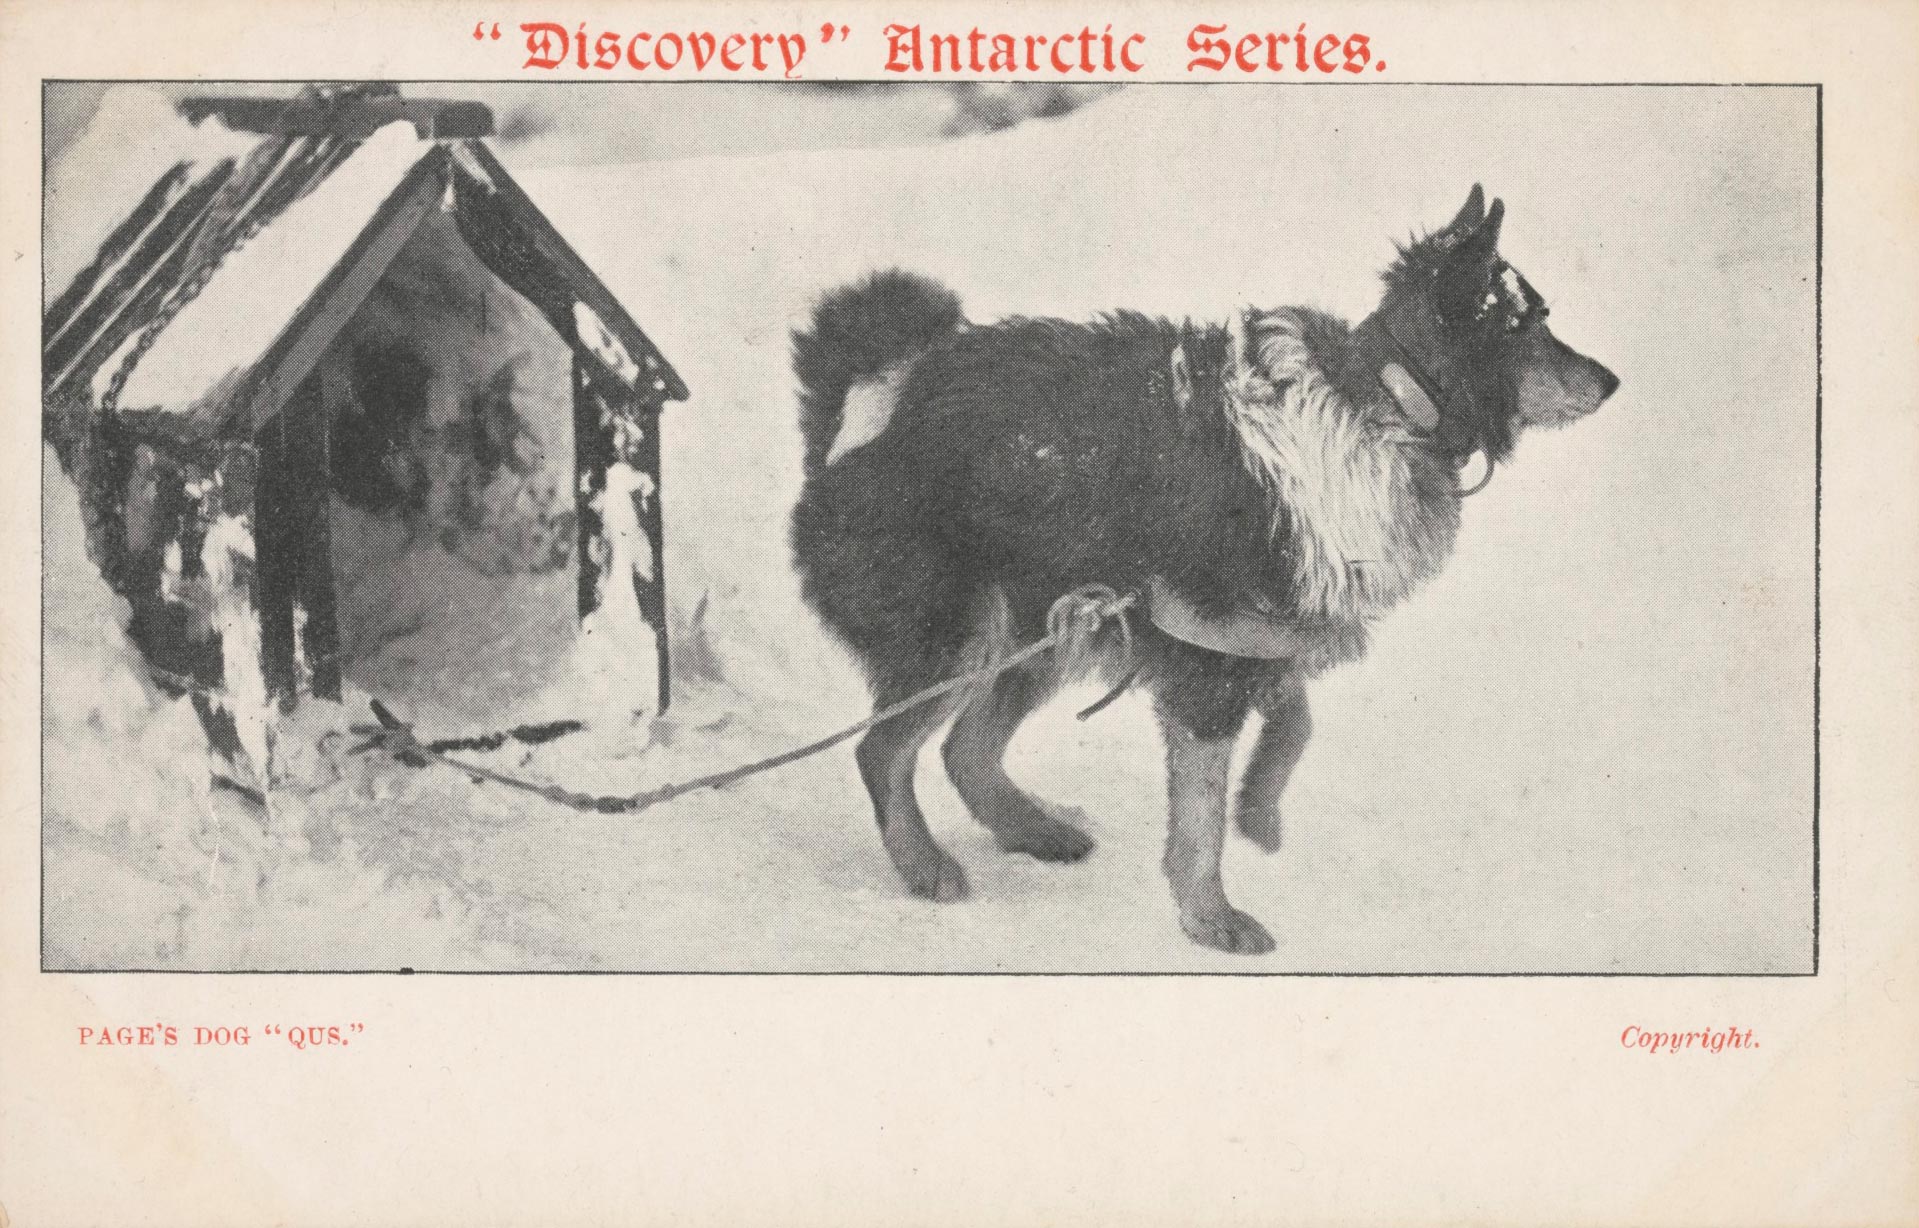 Postcard showing a dog named ‘Qus’, Antarctica, date unknown.